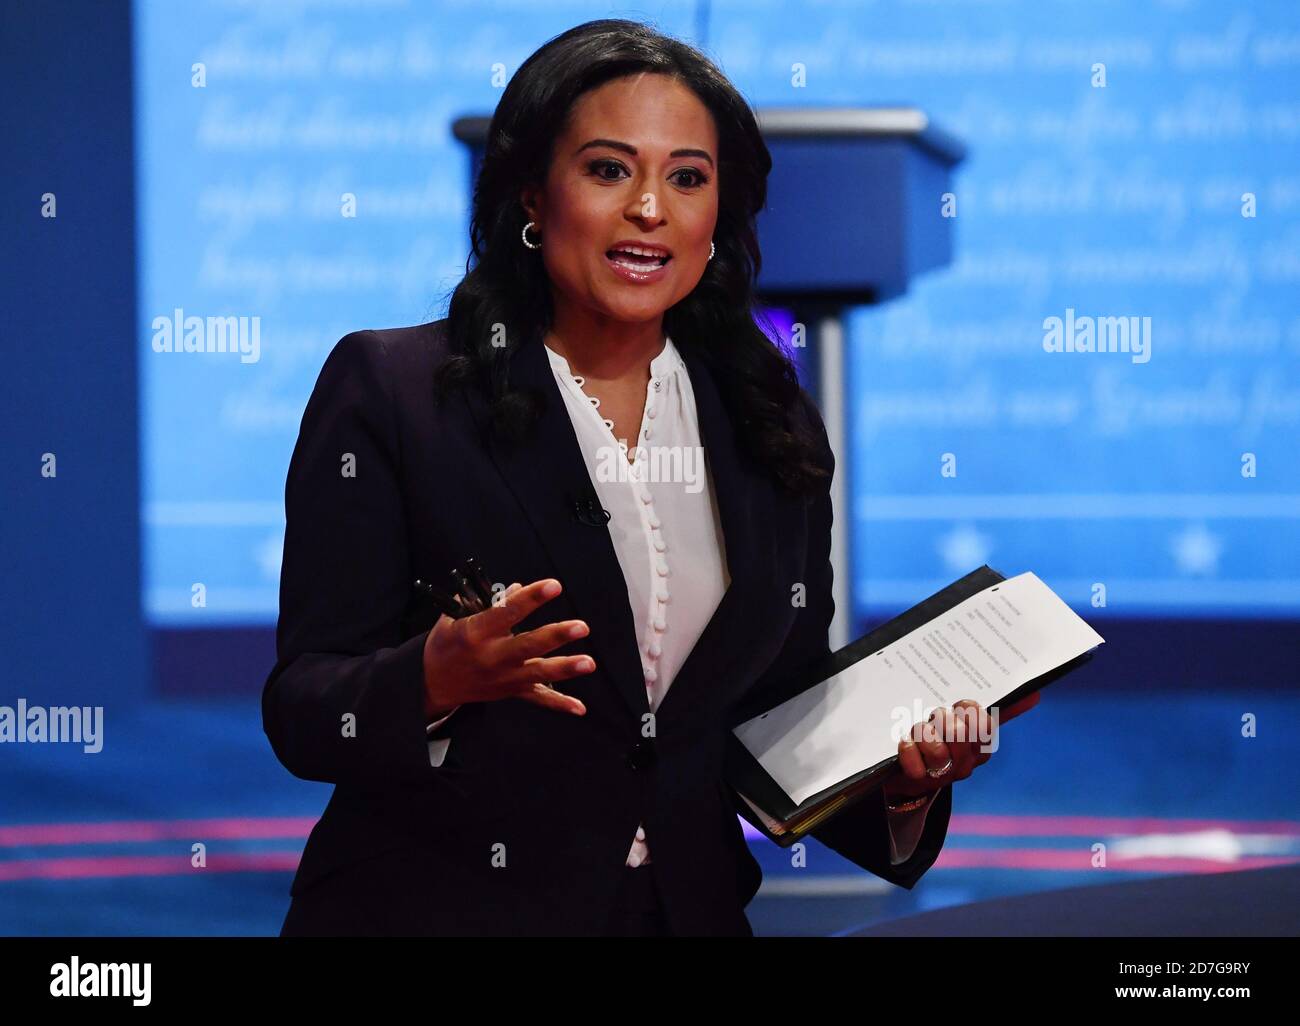 Nashville, United States Of America. 22nd Oct, 2020. Moderator Kristen Welker of NBC News speaks before the start of the the final presidential debate between Republican presidential candidate President Donald Trump and Democratic presidential candidate former Vice President Joe Biden, on the campus of Belmont University, in Nashville, Tennessee on Thursday, October 22, 2020. Credit: Kevin Dietsch/Pool via CNP | usage worldwide Credit: dpa/Alamy Live News Stock Photo